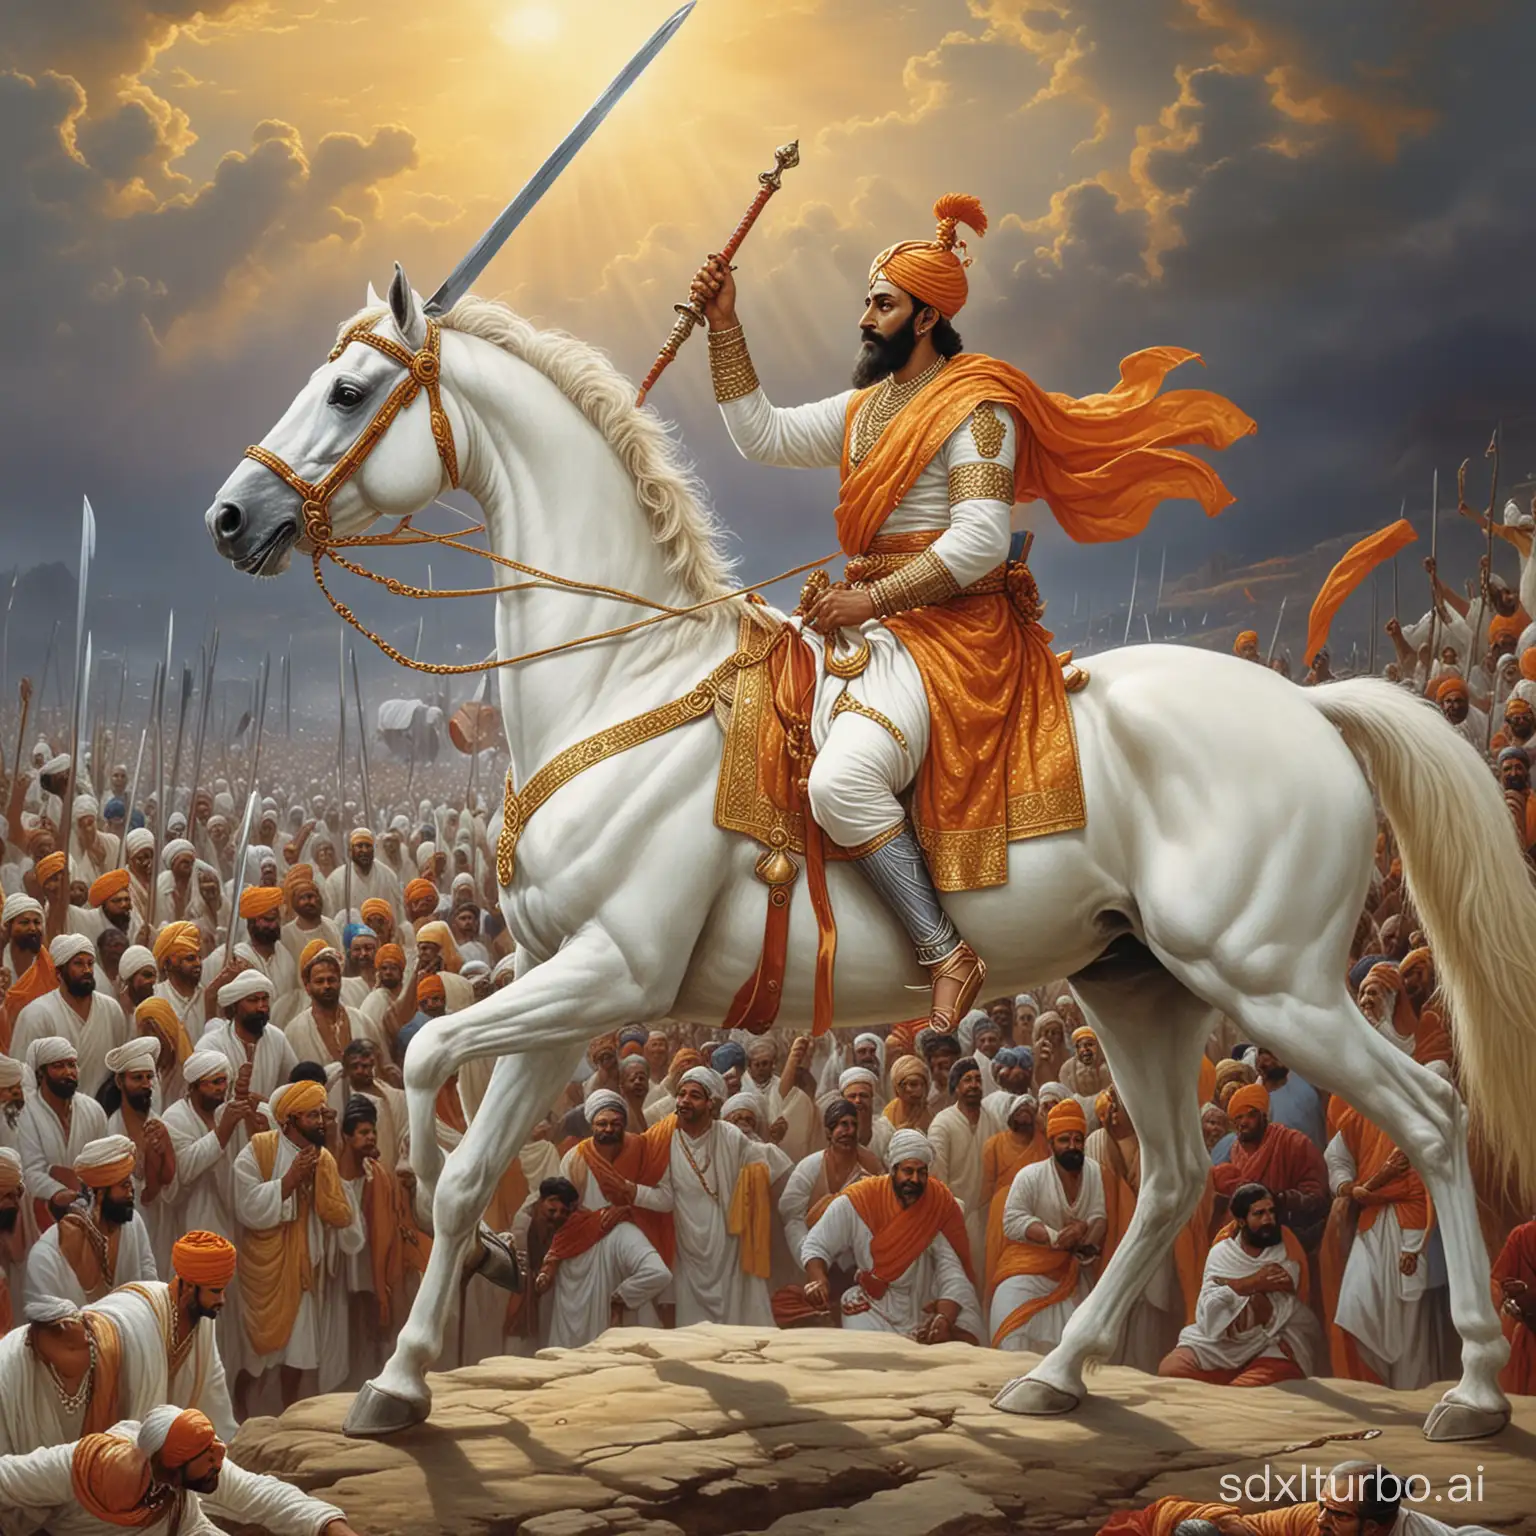 Shivaji Maharaj on his white horse and a sword in hand